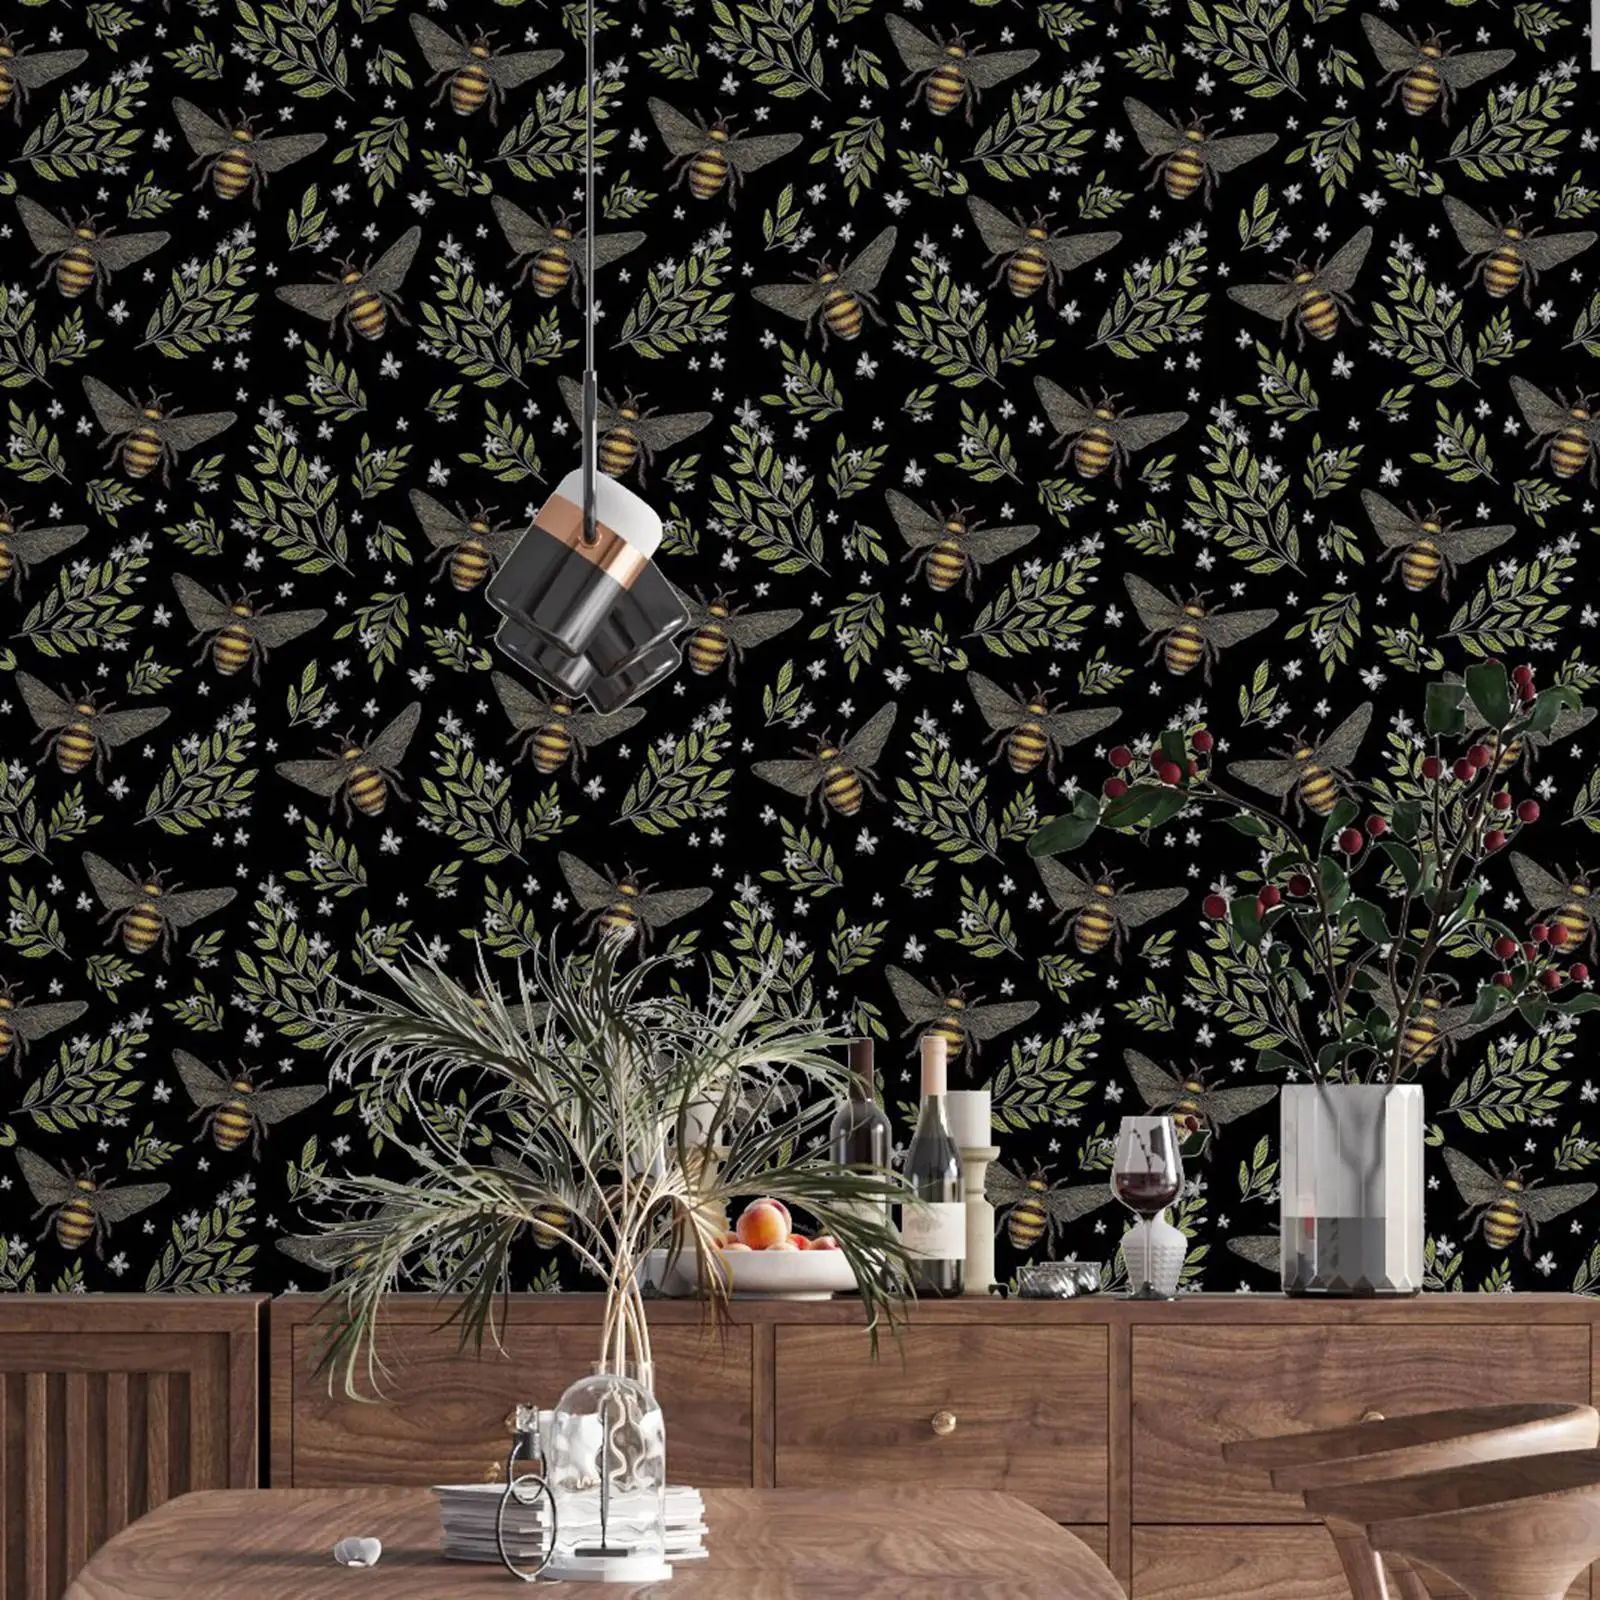 Spring Bee Removable Wallpaper in Midnight Black, Honey Bee Wall Paper in black back ground for living room bedroom HB0624001 смартфон xiaomi redmi 12 ru 4 128gb midnight black